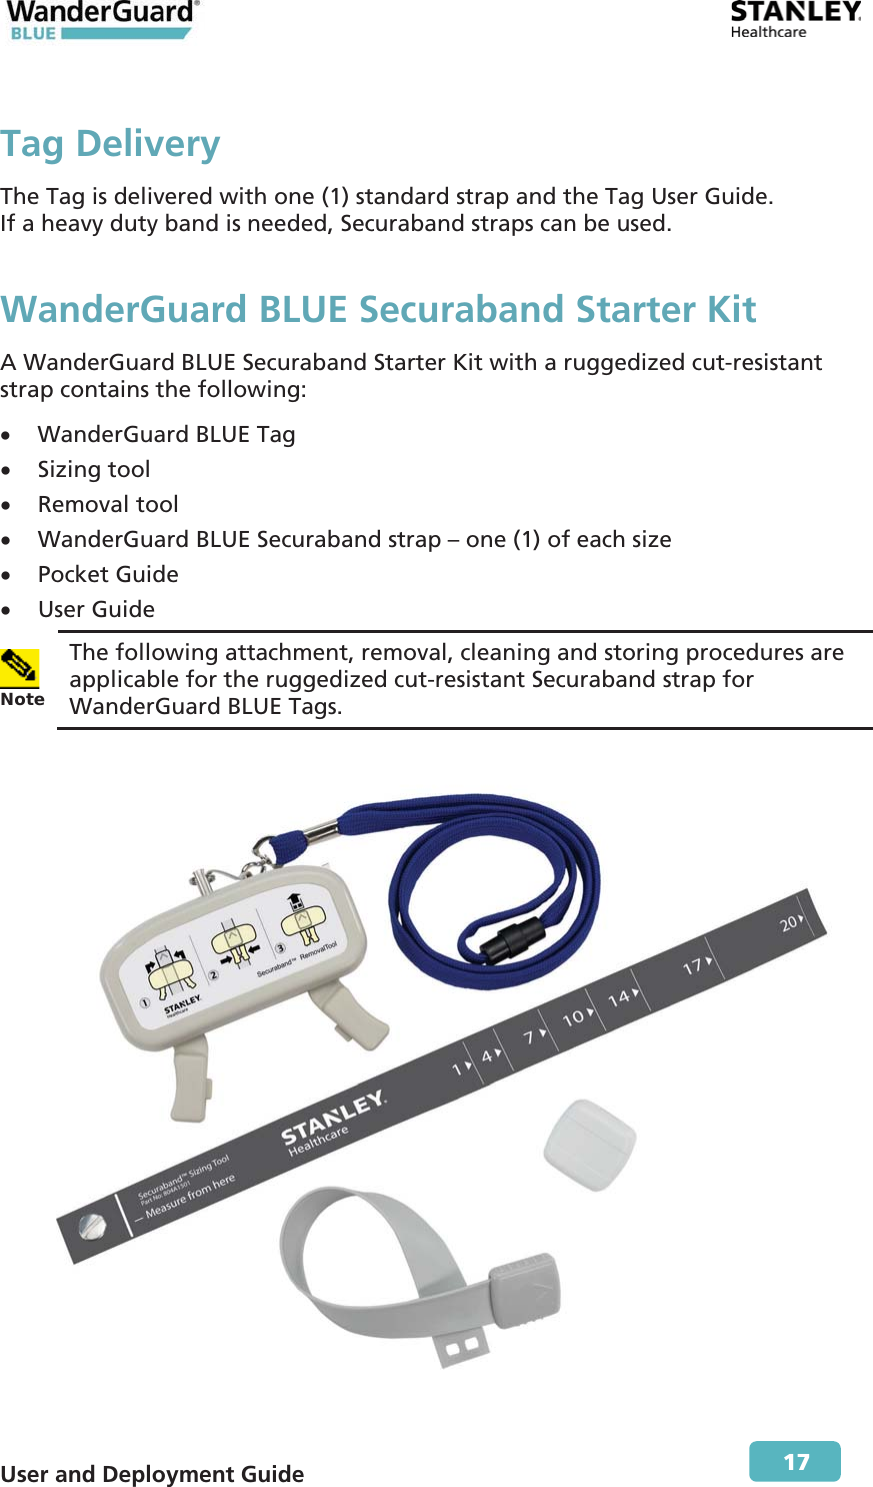  User and Deployment Guide        17 Tag Delivery The Tag is delivered with one (1) standard strap and the Tag User Guide. If a heavy duty band is needed, Securaband straps can be used. WanderGuard BLUE Securaband Starter Kit A WanderGuard BLUE Securaband Starter Kit with a ruggedized cut-resistant strap contains the following: x WanderGuard BLUE Tag x Sizing tool x Removal tool x WanderGuard BLUE Securaband strap – one (1) of each size x Pocket Guide x User Guide  Note The following attachment, removal, cleaning and storing procedures are applicable for the ruggedized cut-resistant Securaband strap for WanderGuard BLUE Tags.   